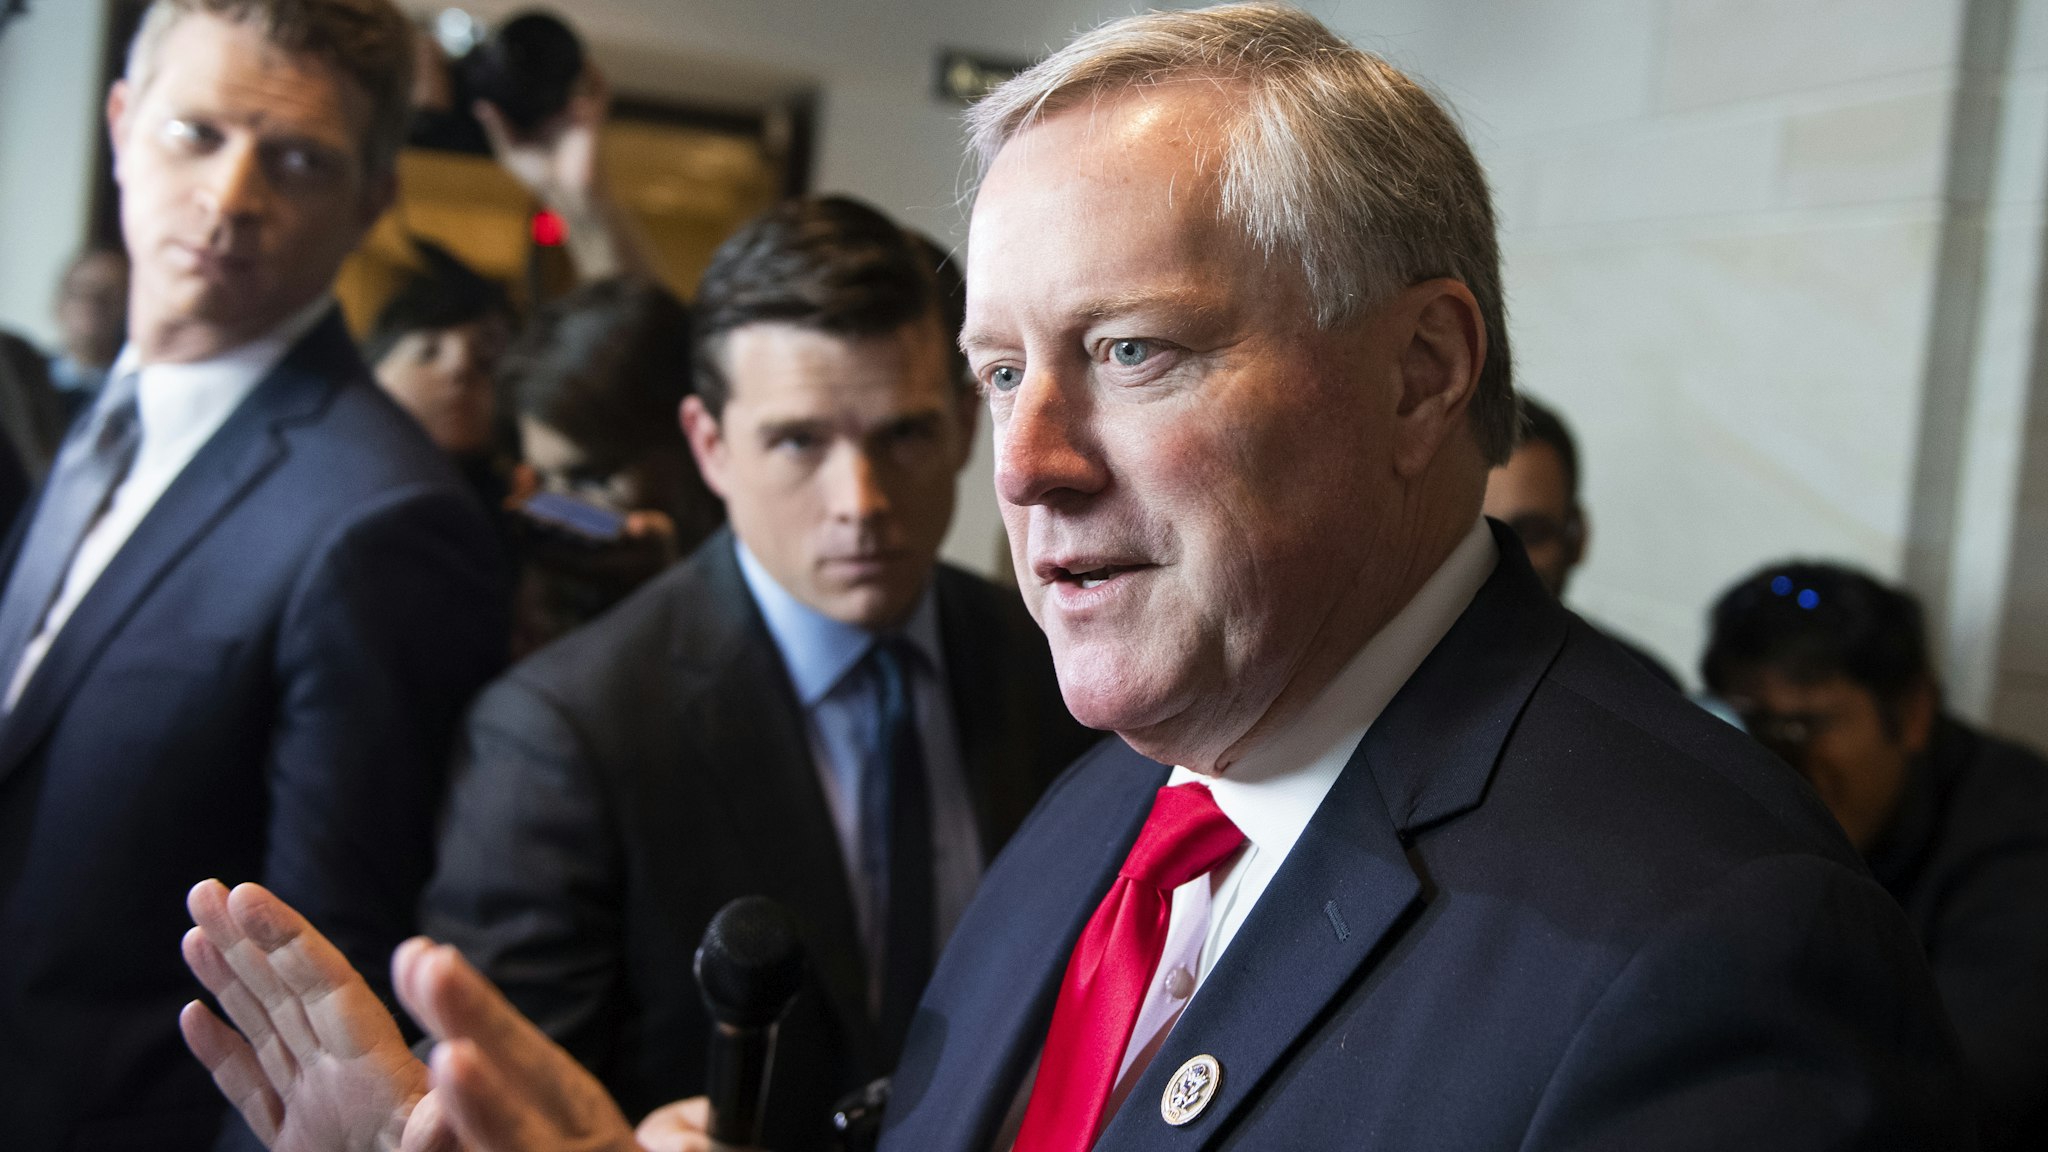 Rep. Mark Meadows, R-N.C., speaks to reporters outside a scheduled deposition related to the House's impeachment inquiry in the Capitol Visitor Center on Monday, November 2019. John Eisenberg, lawyer for the National Security Council, and Robert Blair, a senior adviser to Acting Chief of Staff Mick Mulvaney, did not appear for their depositions.